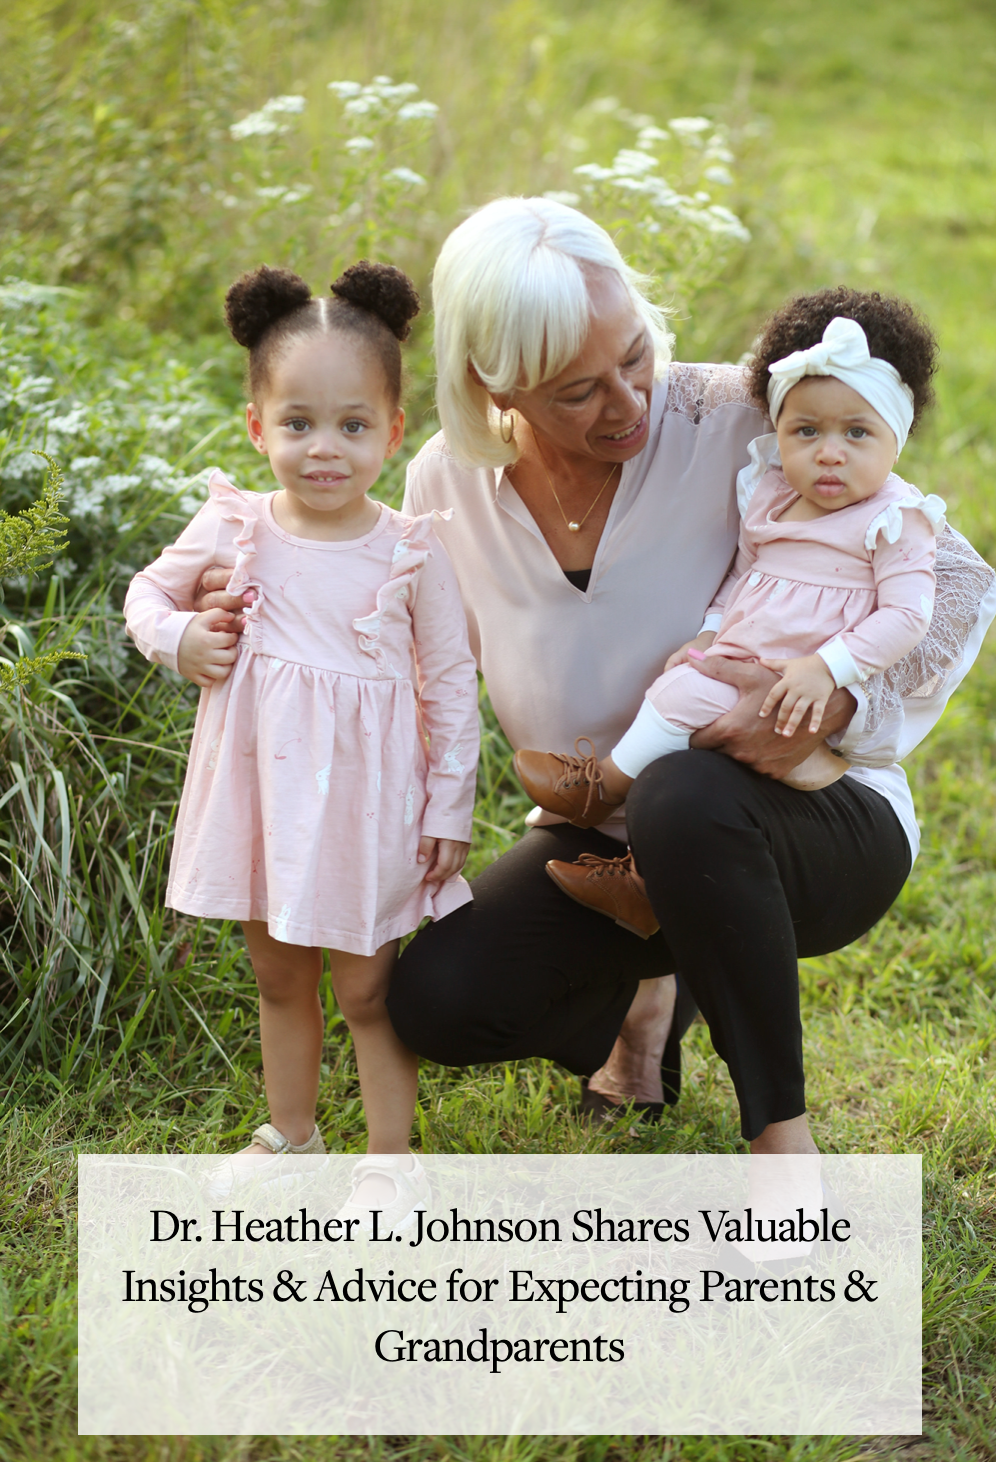 Dr. Heather L. Johnson Shares Valuable Insights & Advice for Expecting Parents & Grandparents